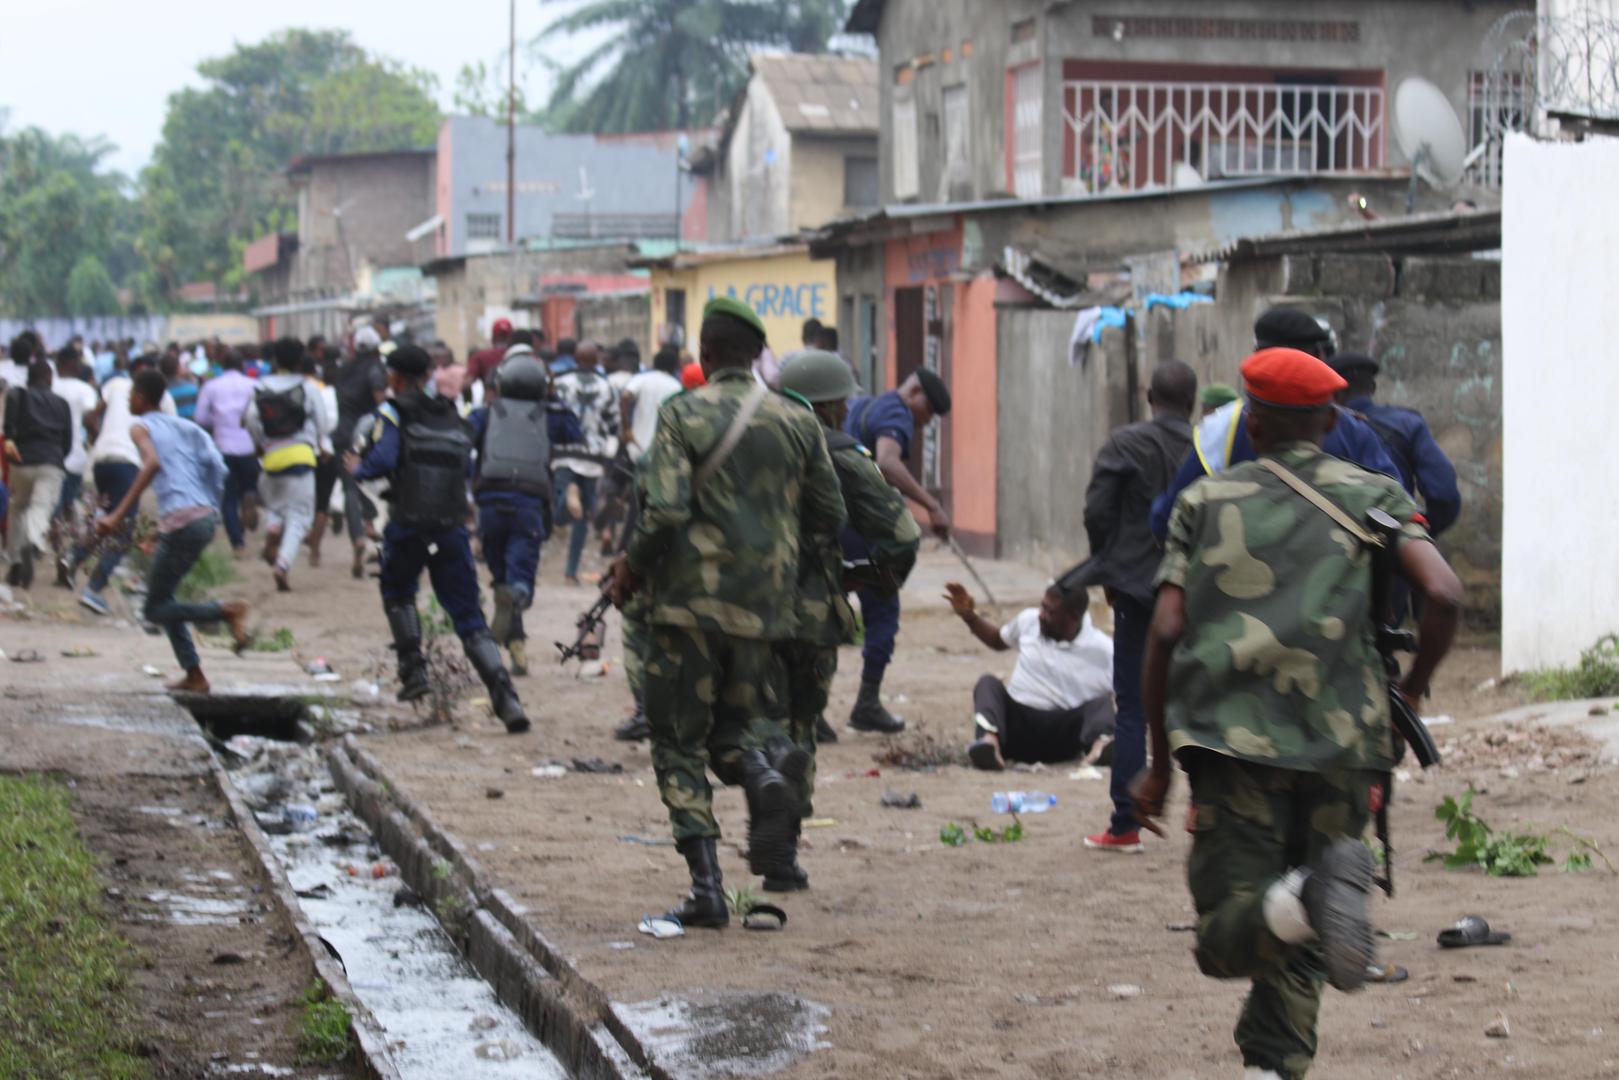 Security forces pursue peaceful protesters in Kinshasa, capital of the Democratic Republic of Congo, on December 31, 2017.